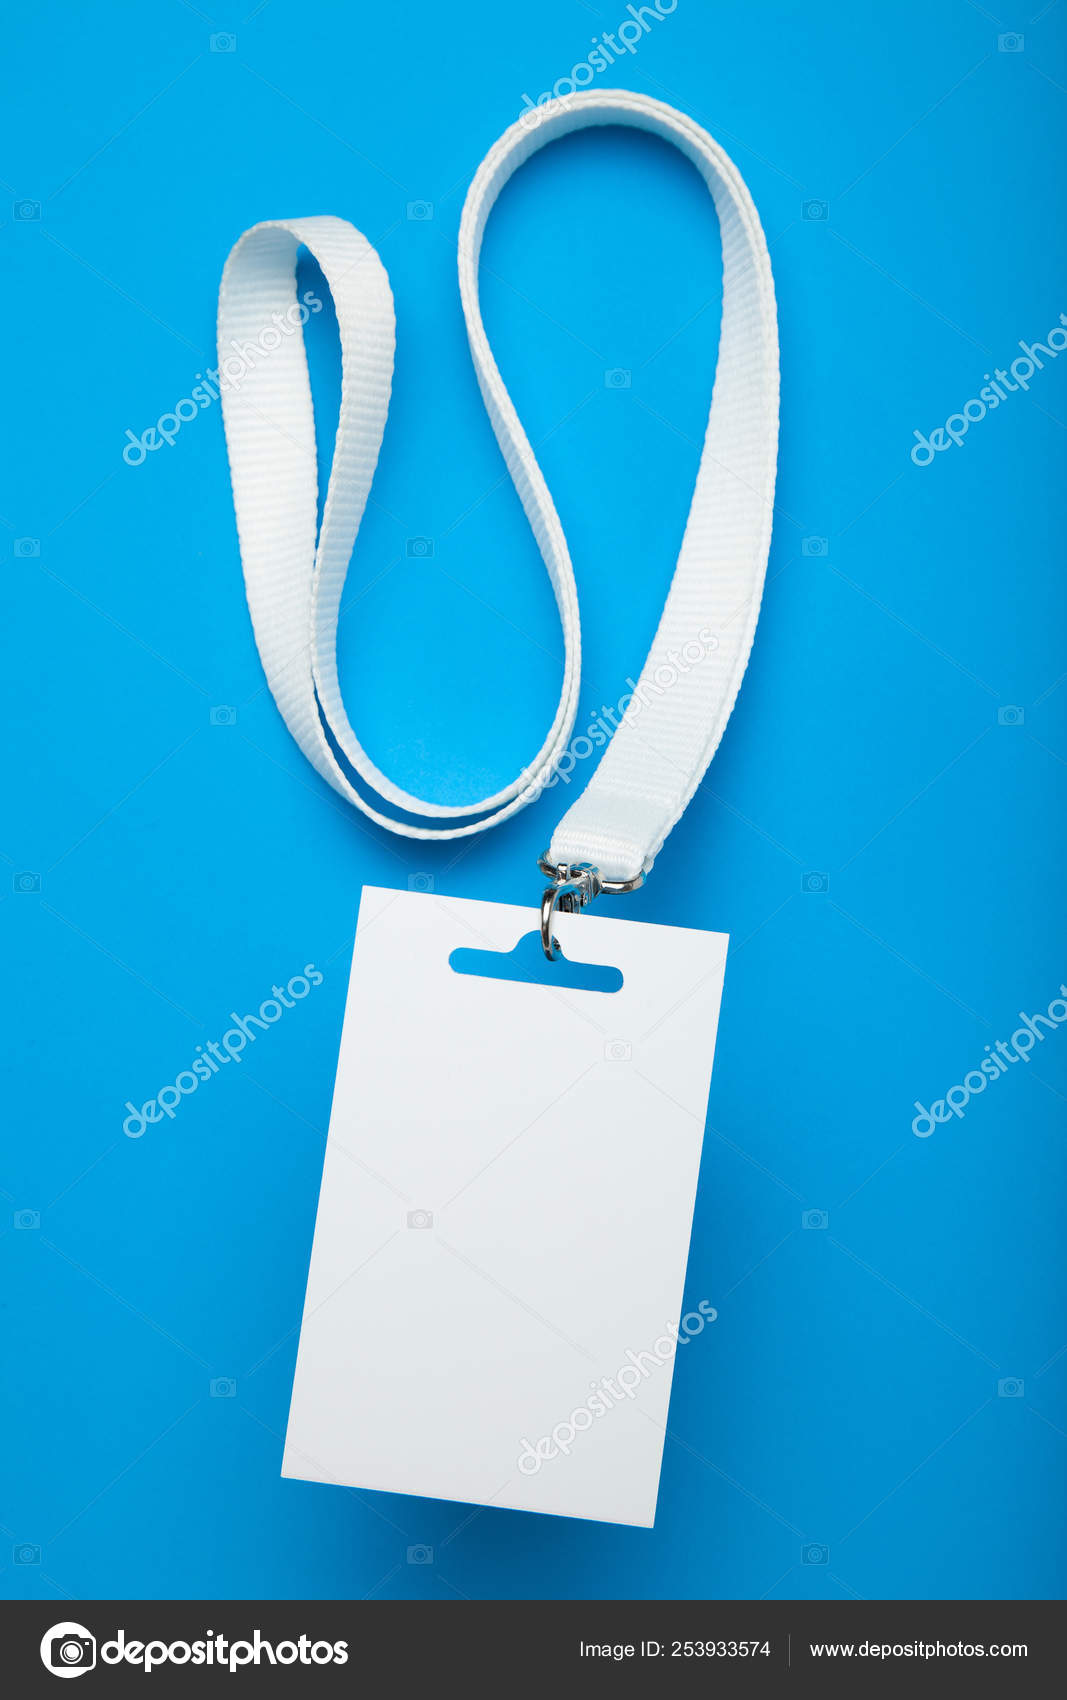 Download Vip Badge Mockup Event Access With Lanyard Stock Photo Image By C Liimit 253933574